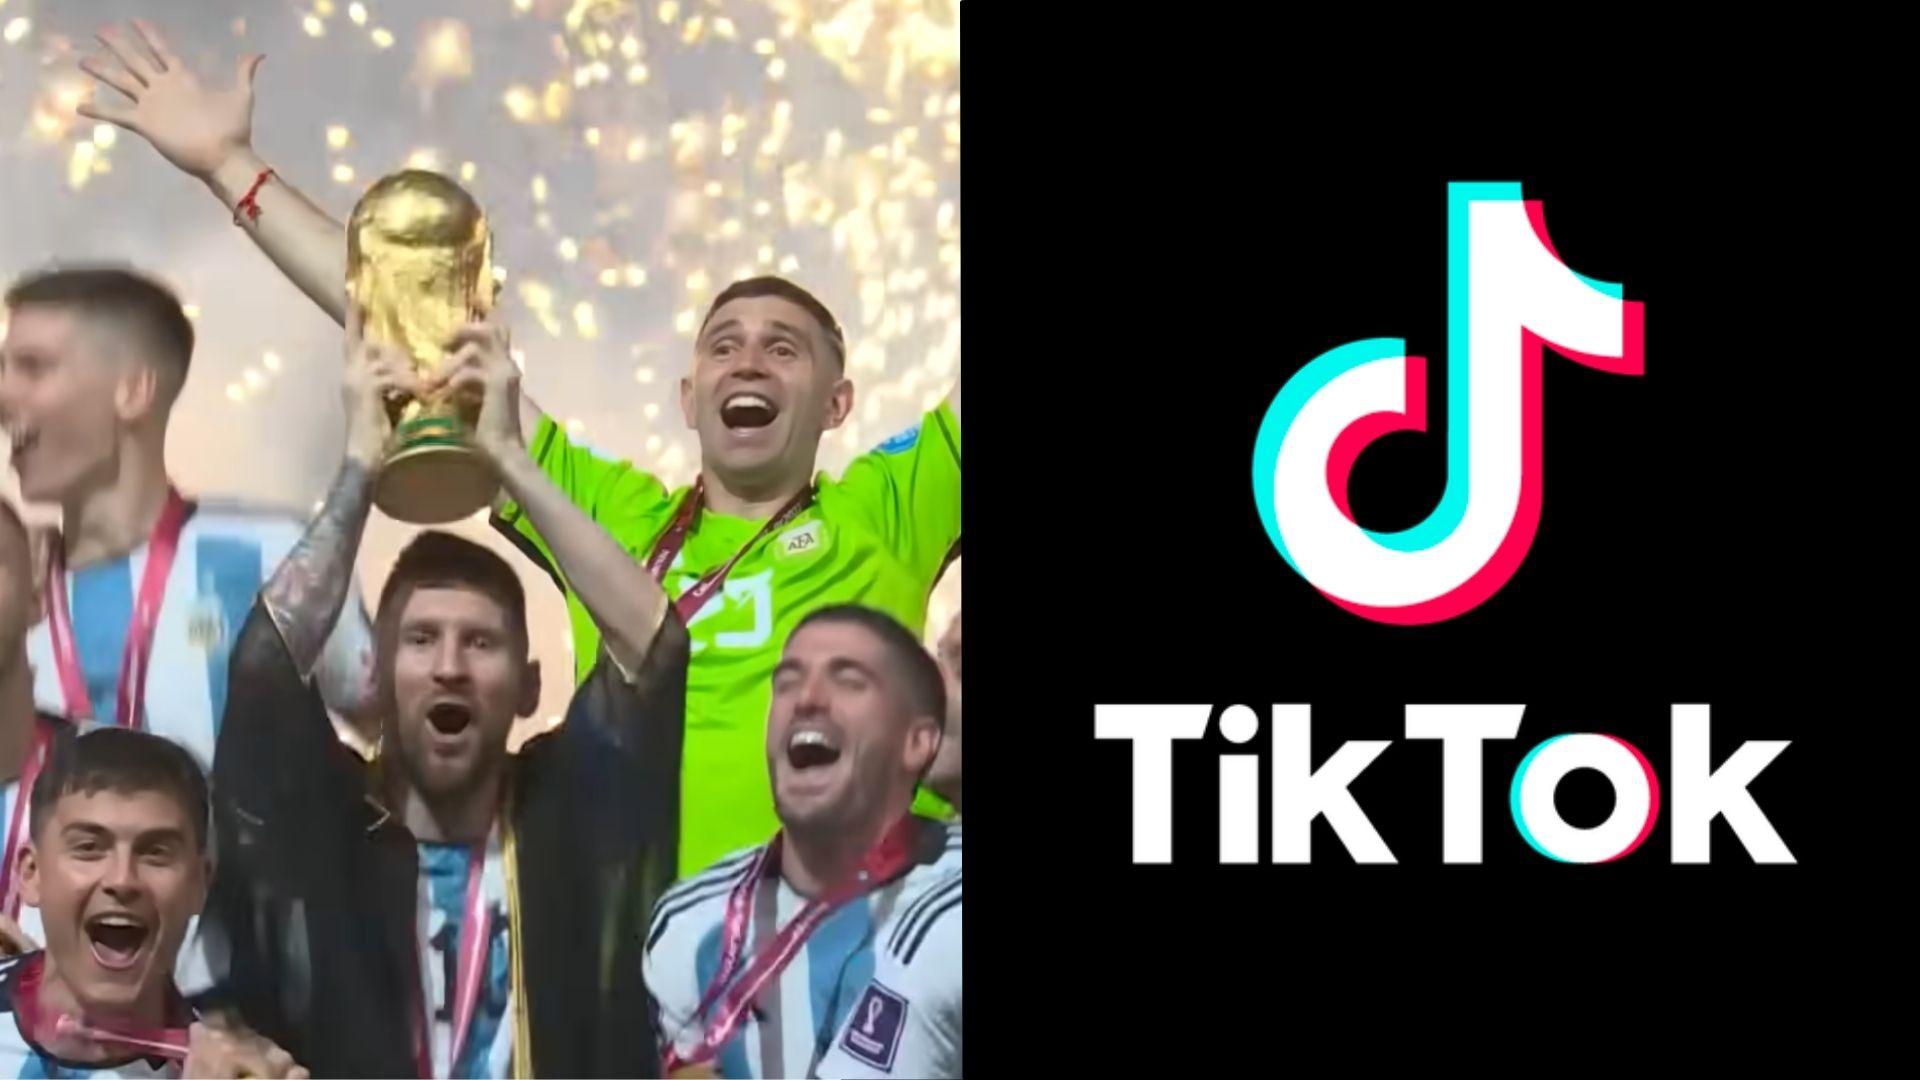 Screenshot of Lionel Messi with trophy and TikTok logo